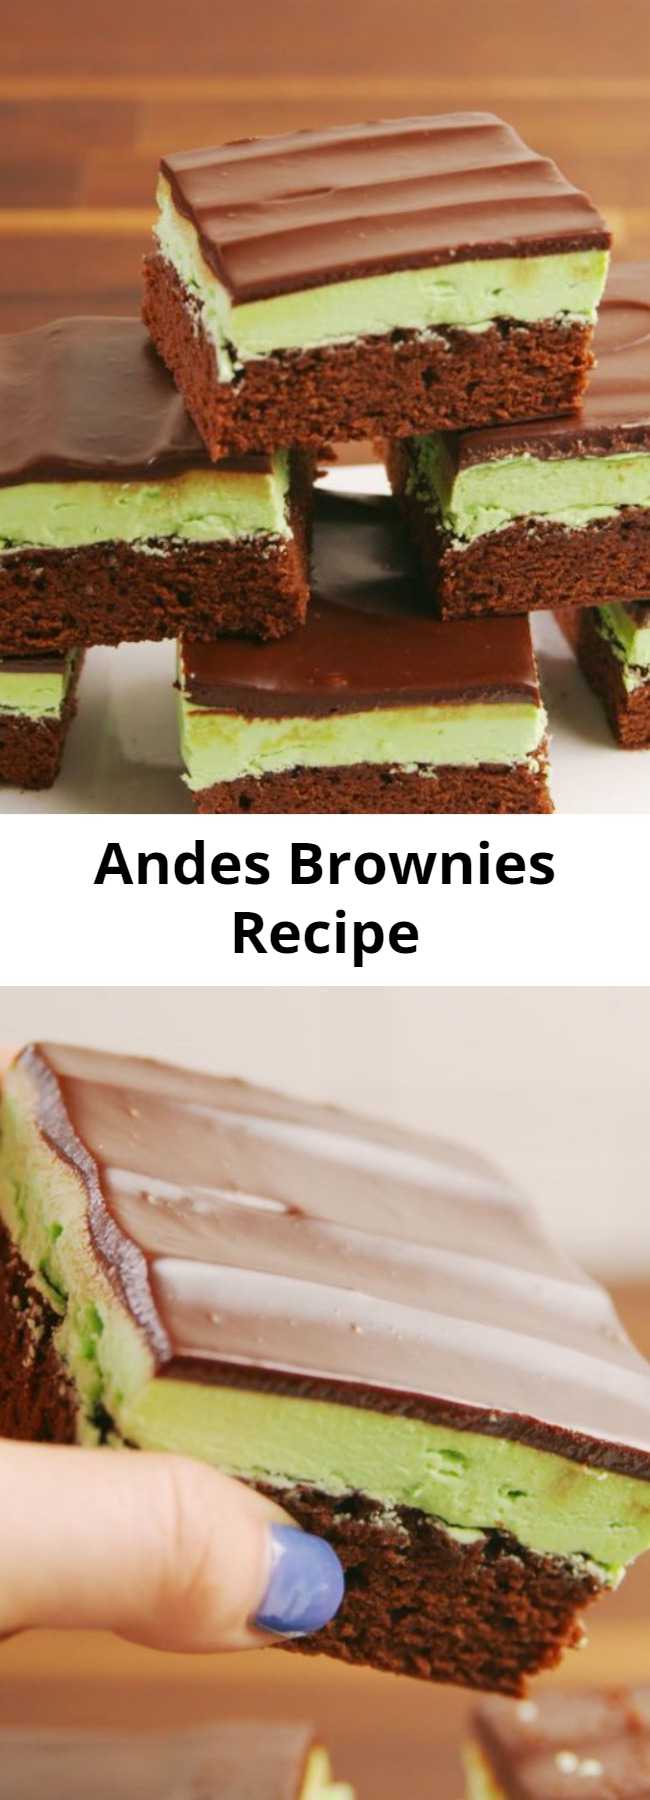 Andes Brownies Recipe - A brownie that looks and tastes like Andes Mints are a dream come true. A decadent brownie for the avid mint and chocolate lover.